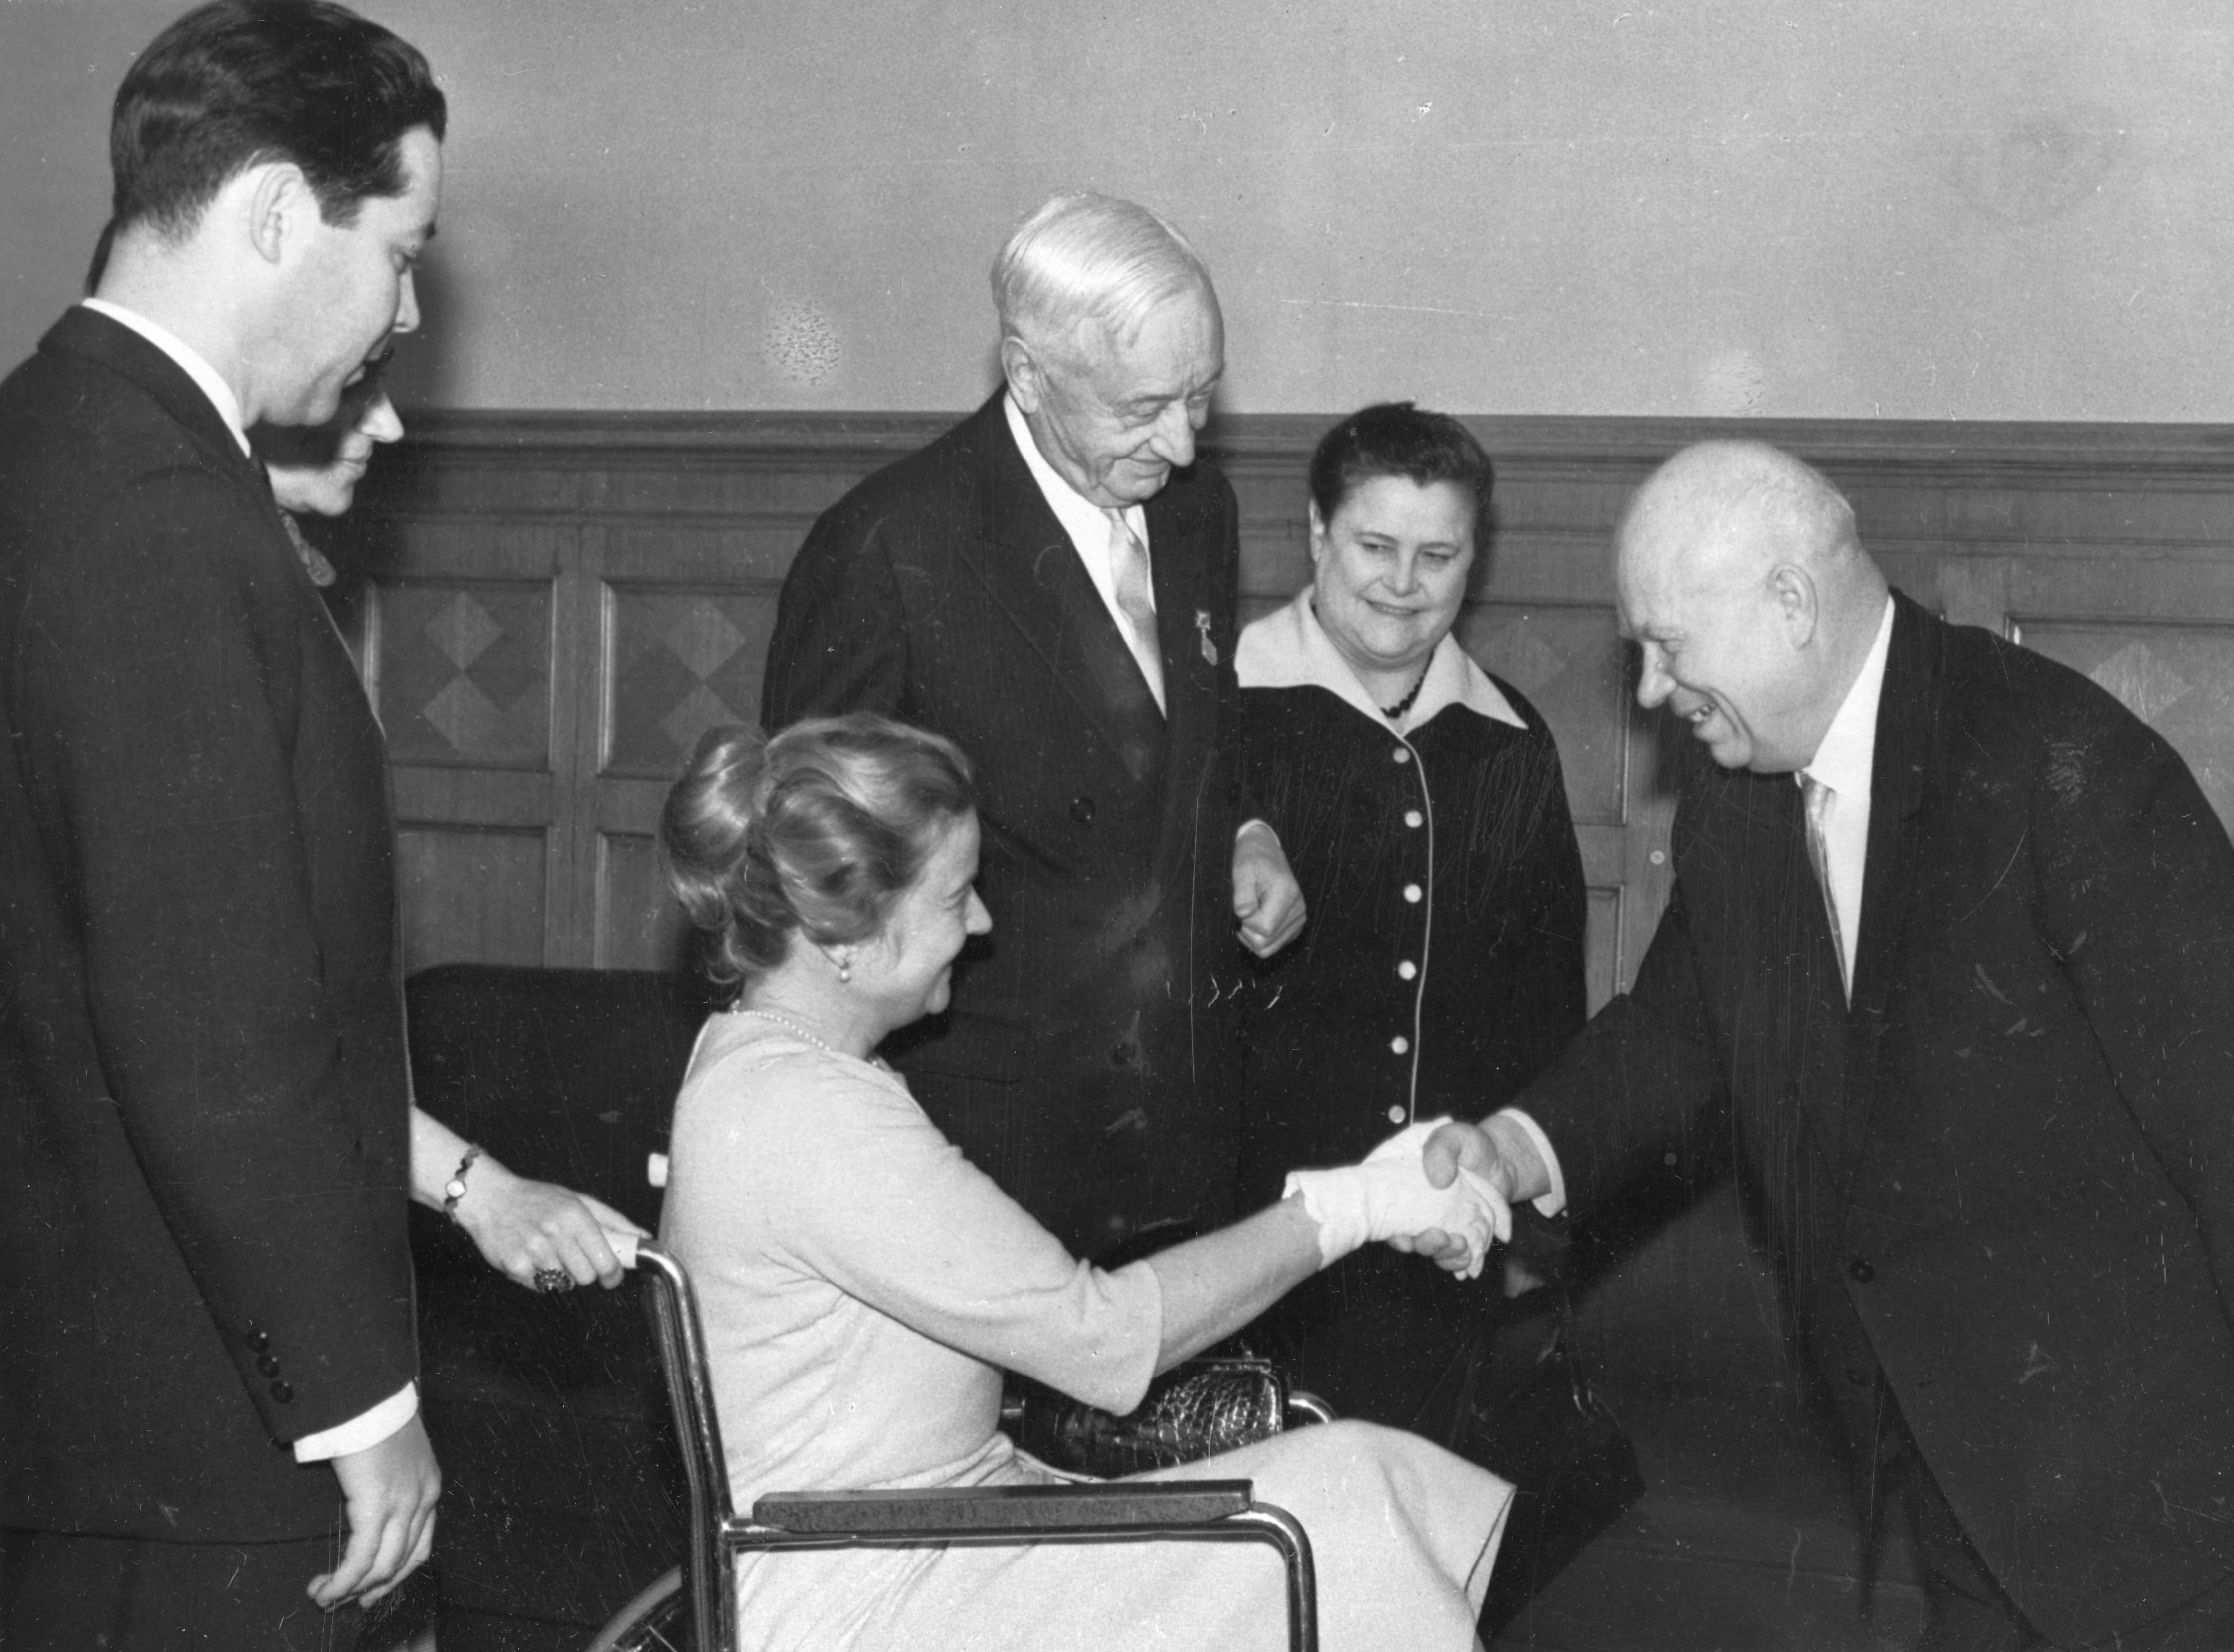 Cyrus Eaton (standing) and his wife Anne (seated in a wheelchair) meet with Nikita Khrushchev in Moscow, 1964.  